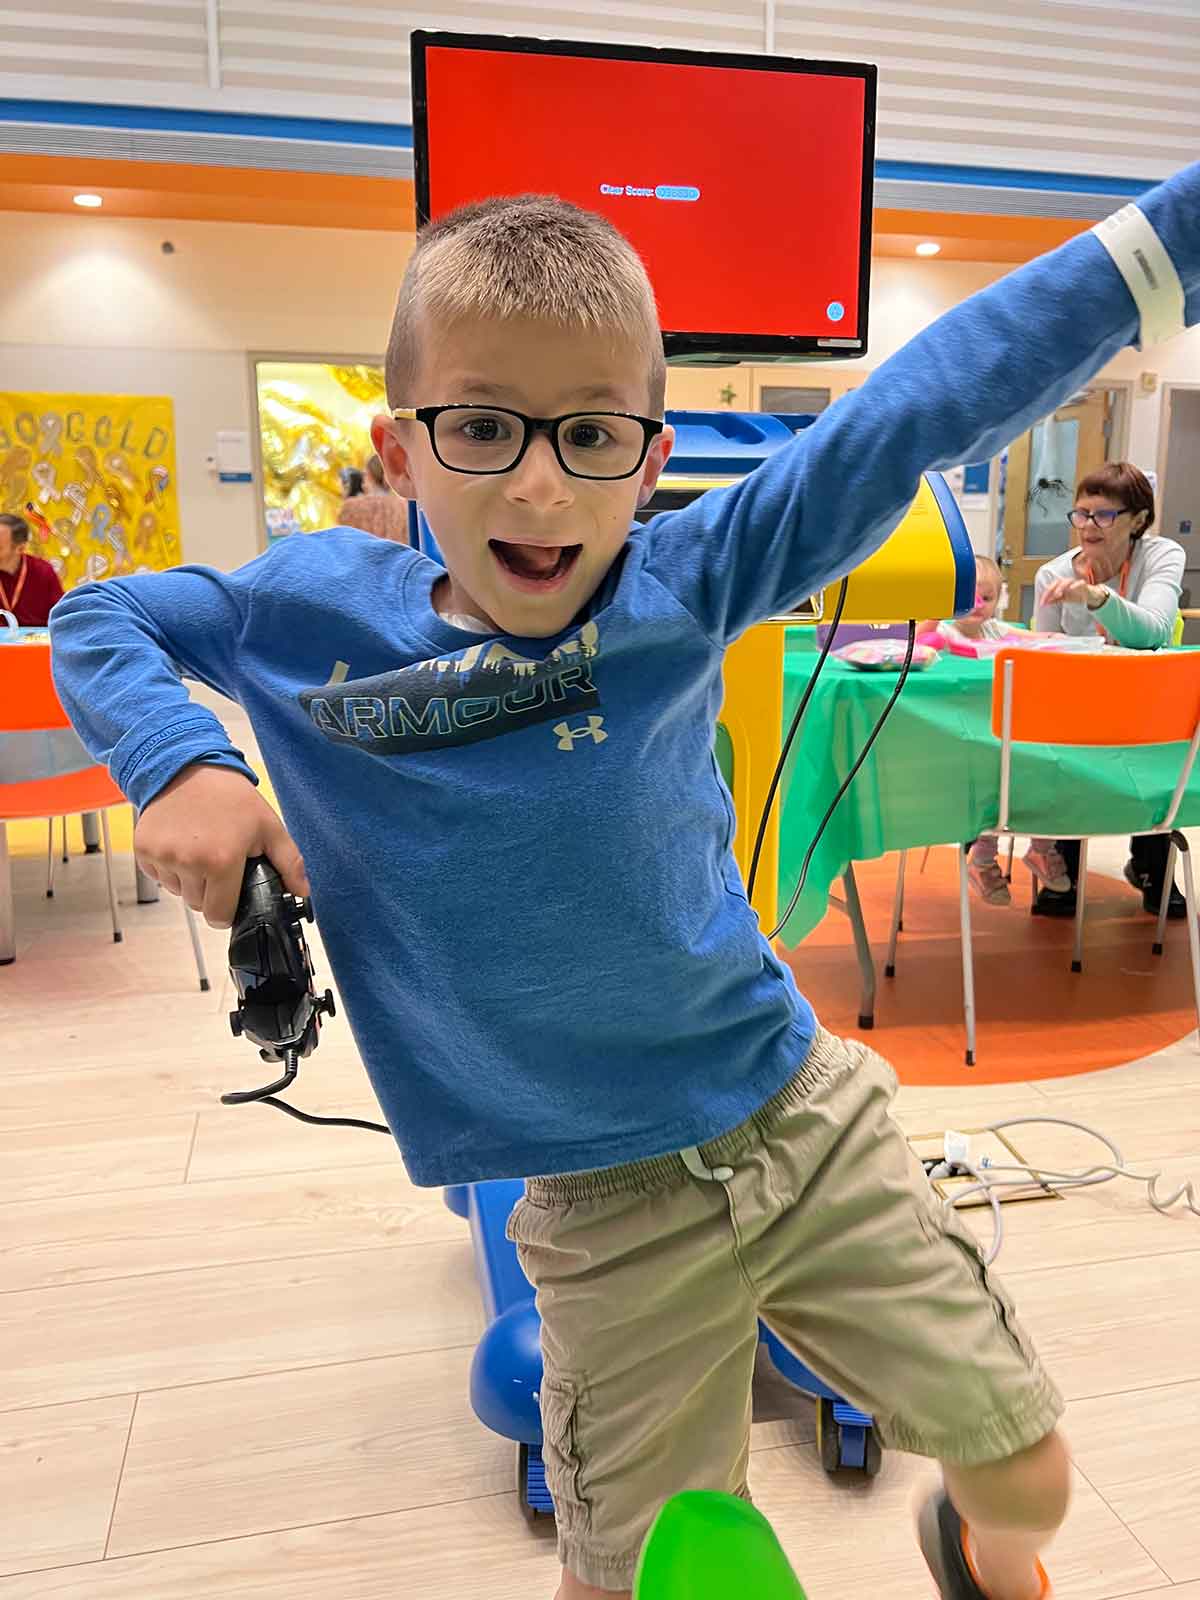 Boy in a blue shirt and black glasses holding a video game controller standing on one leg and smiling.